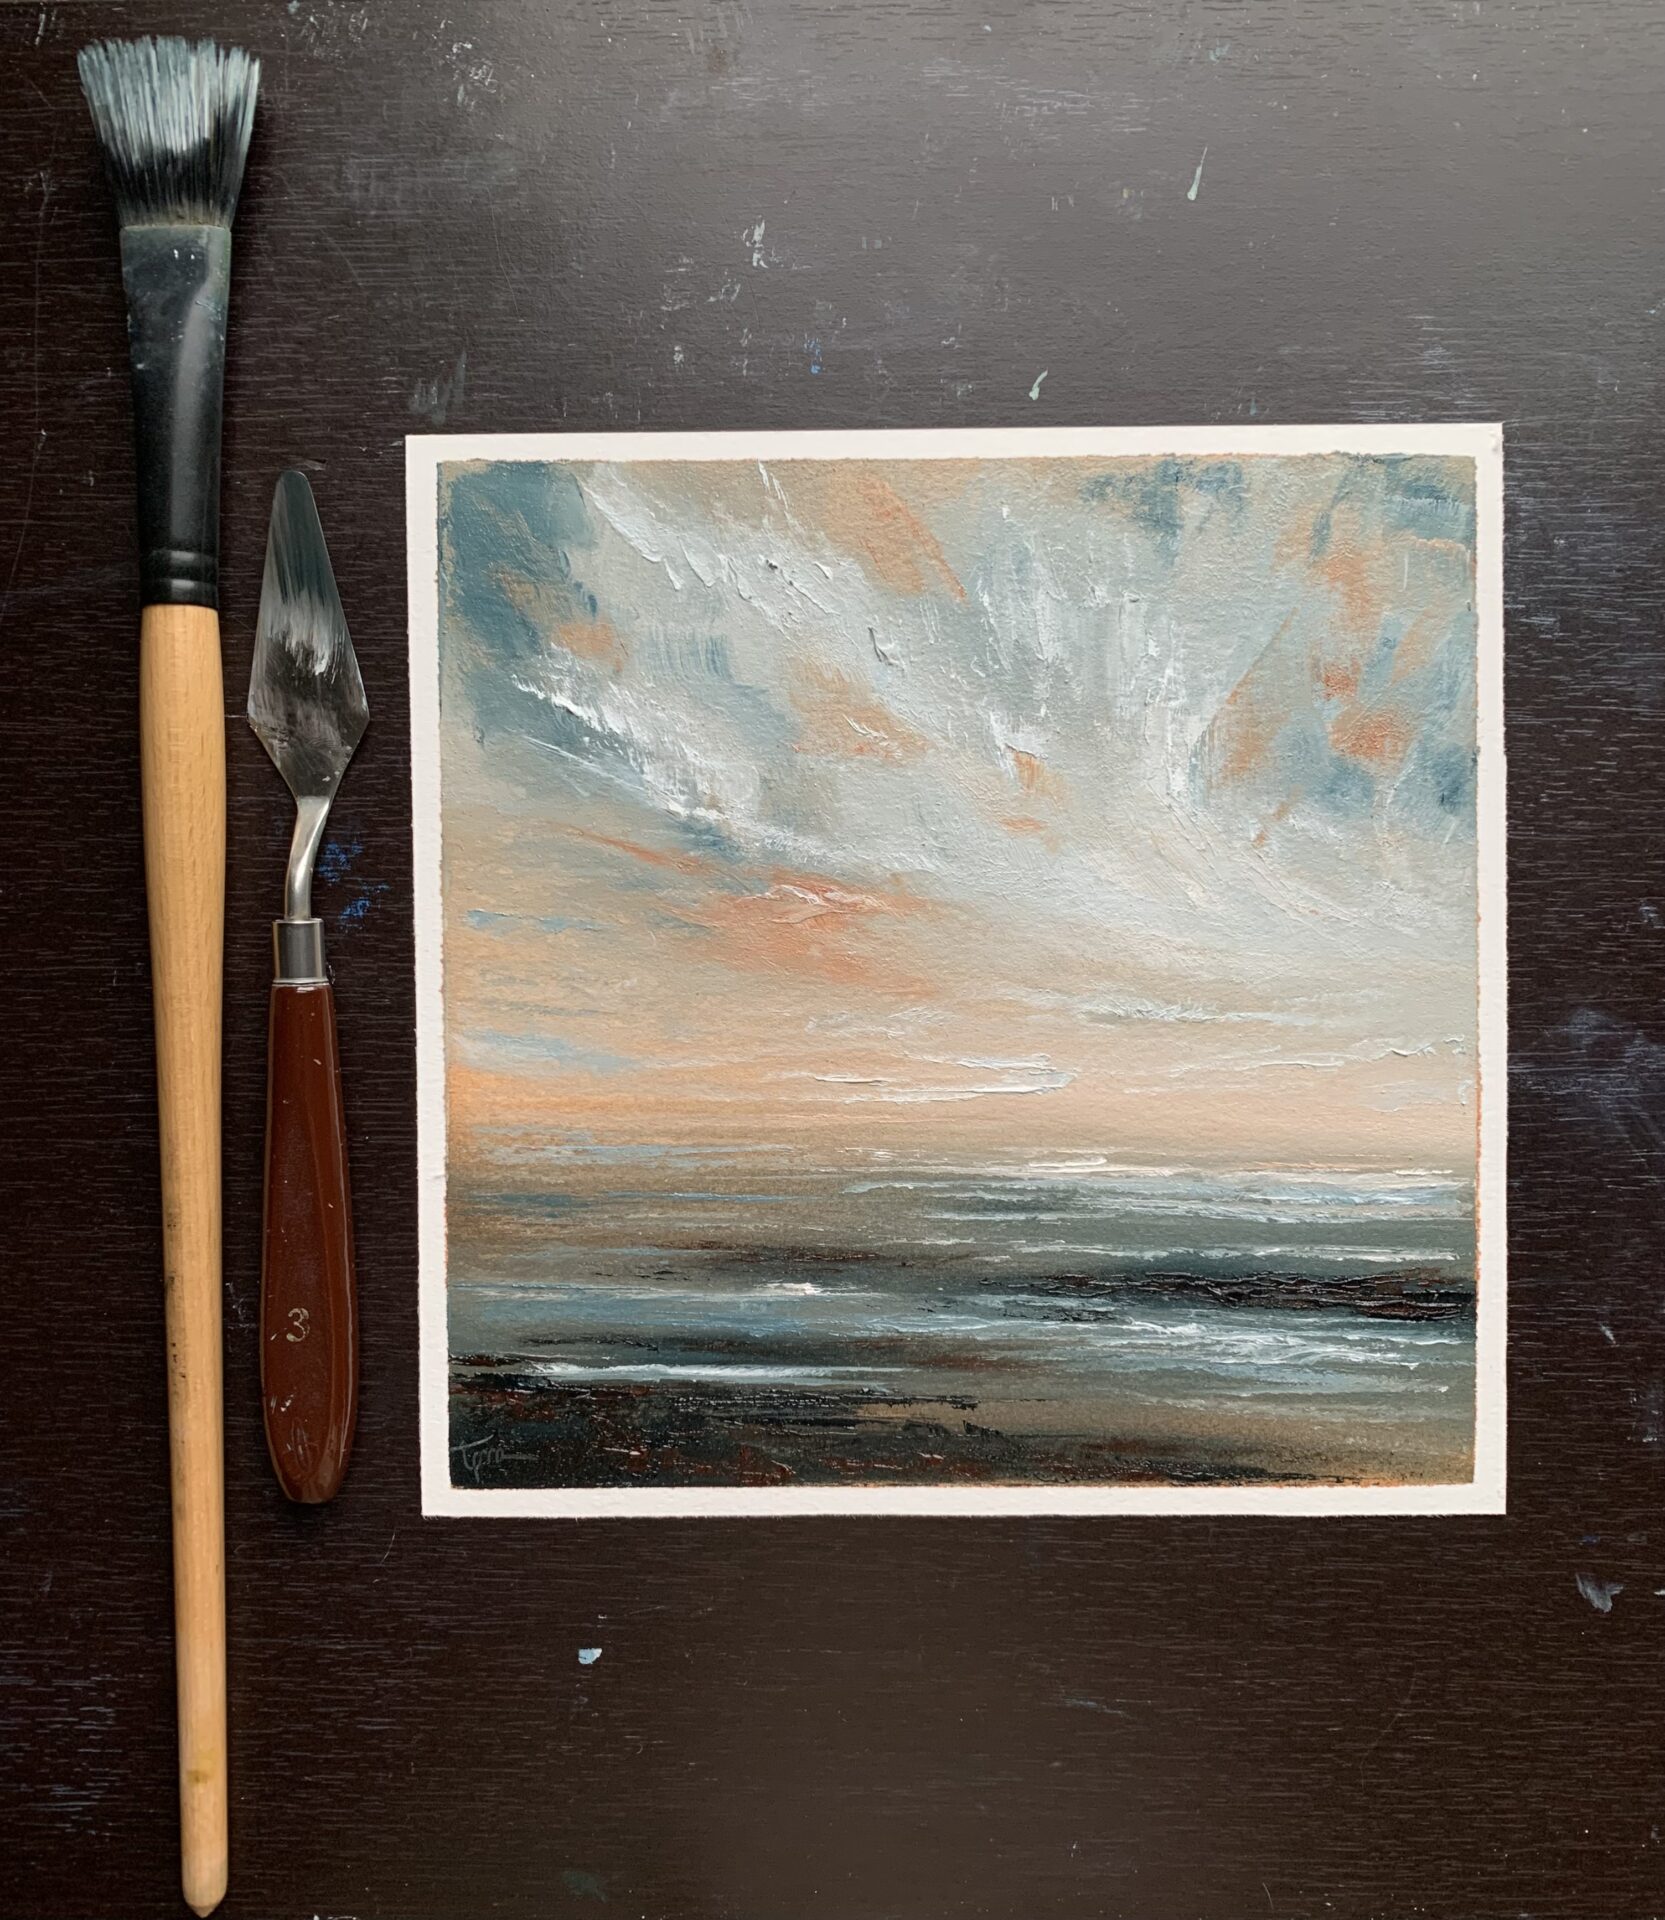 Original seascape oil painting by Tisha Mark, "Storm Light" 8"x8" oil on Arches oil paper (2024), shown here with a paintbrush and palette knife for scale.